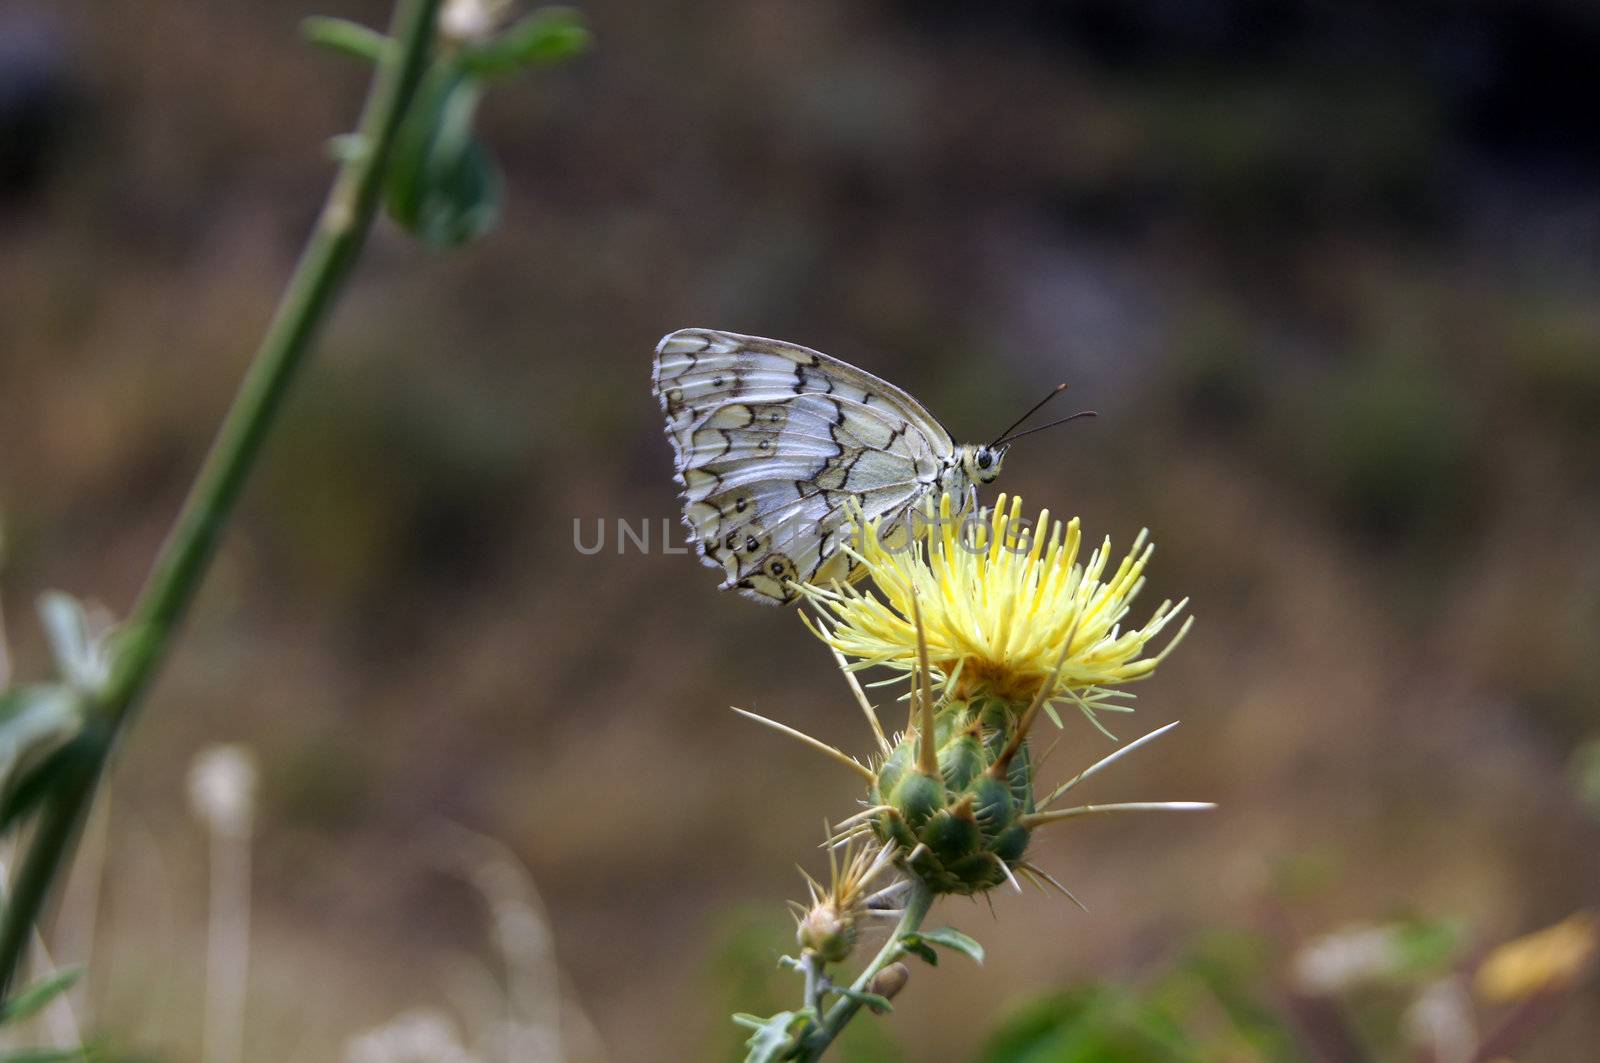 a marbled white butterfly melanargia galathea feeding on a creeping thistle flower by Elet